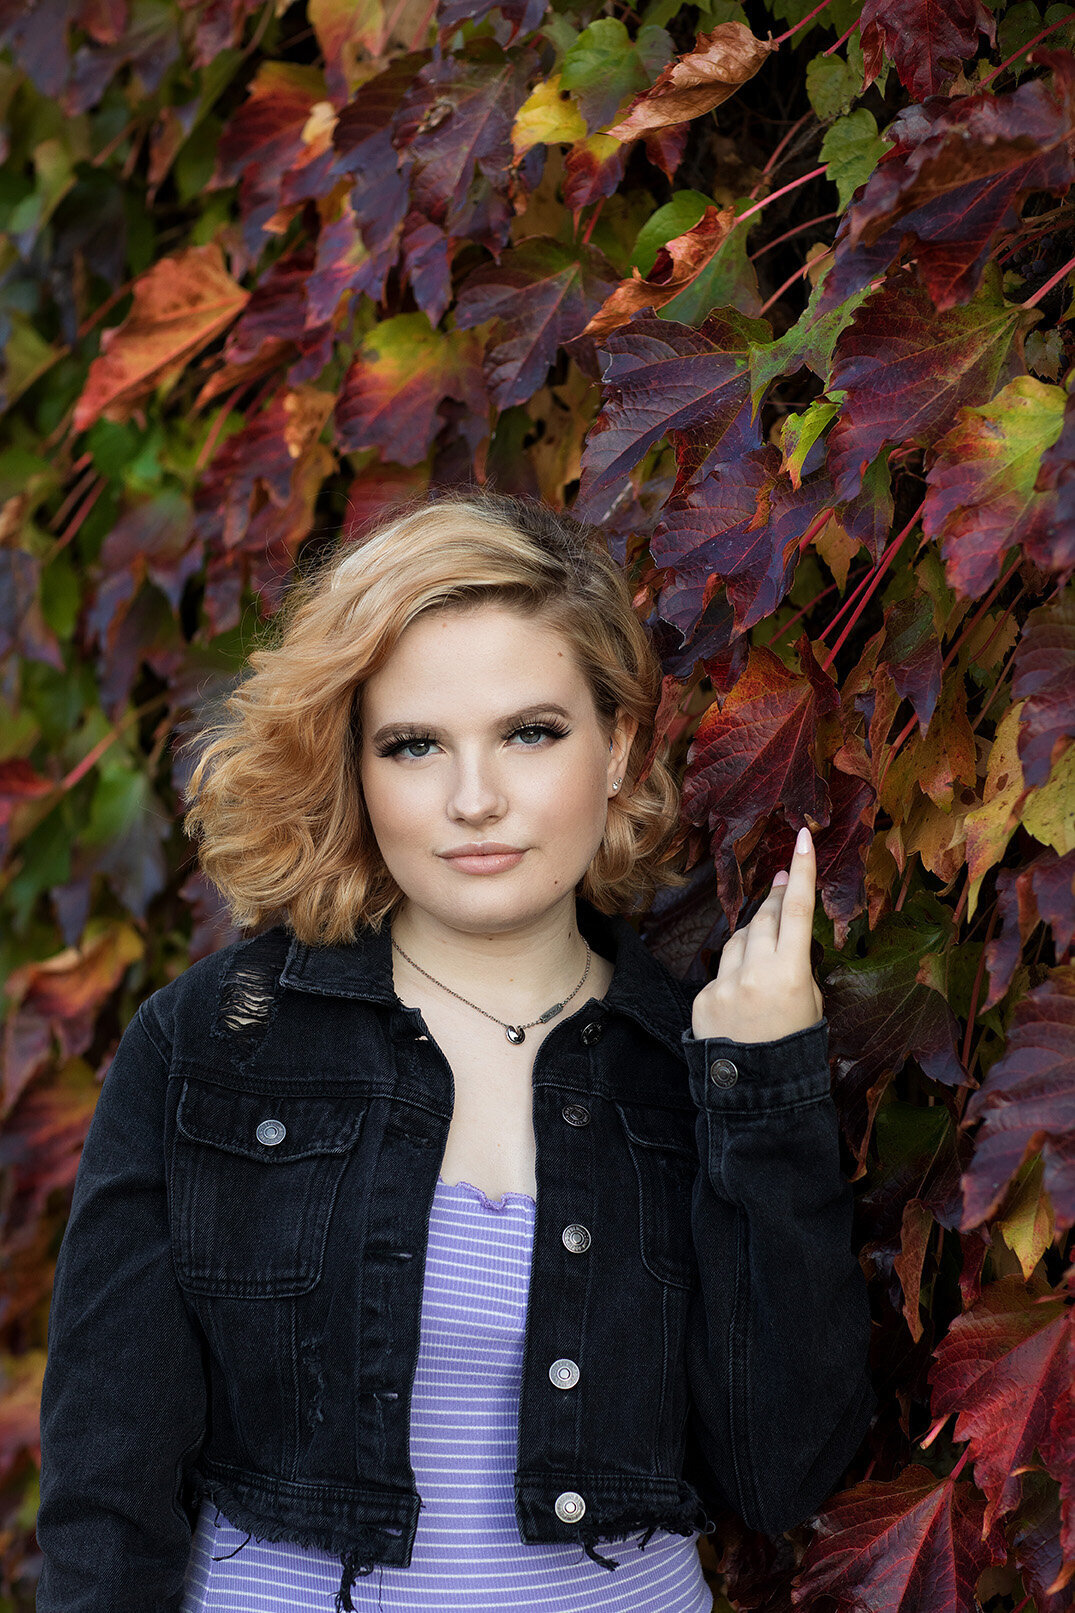 Young woman standing next to wall of colorful fall leaves wearing purple dress and black jean jacket.